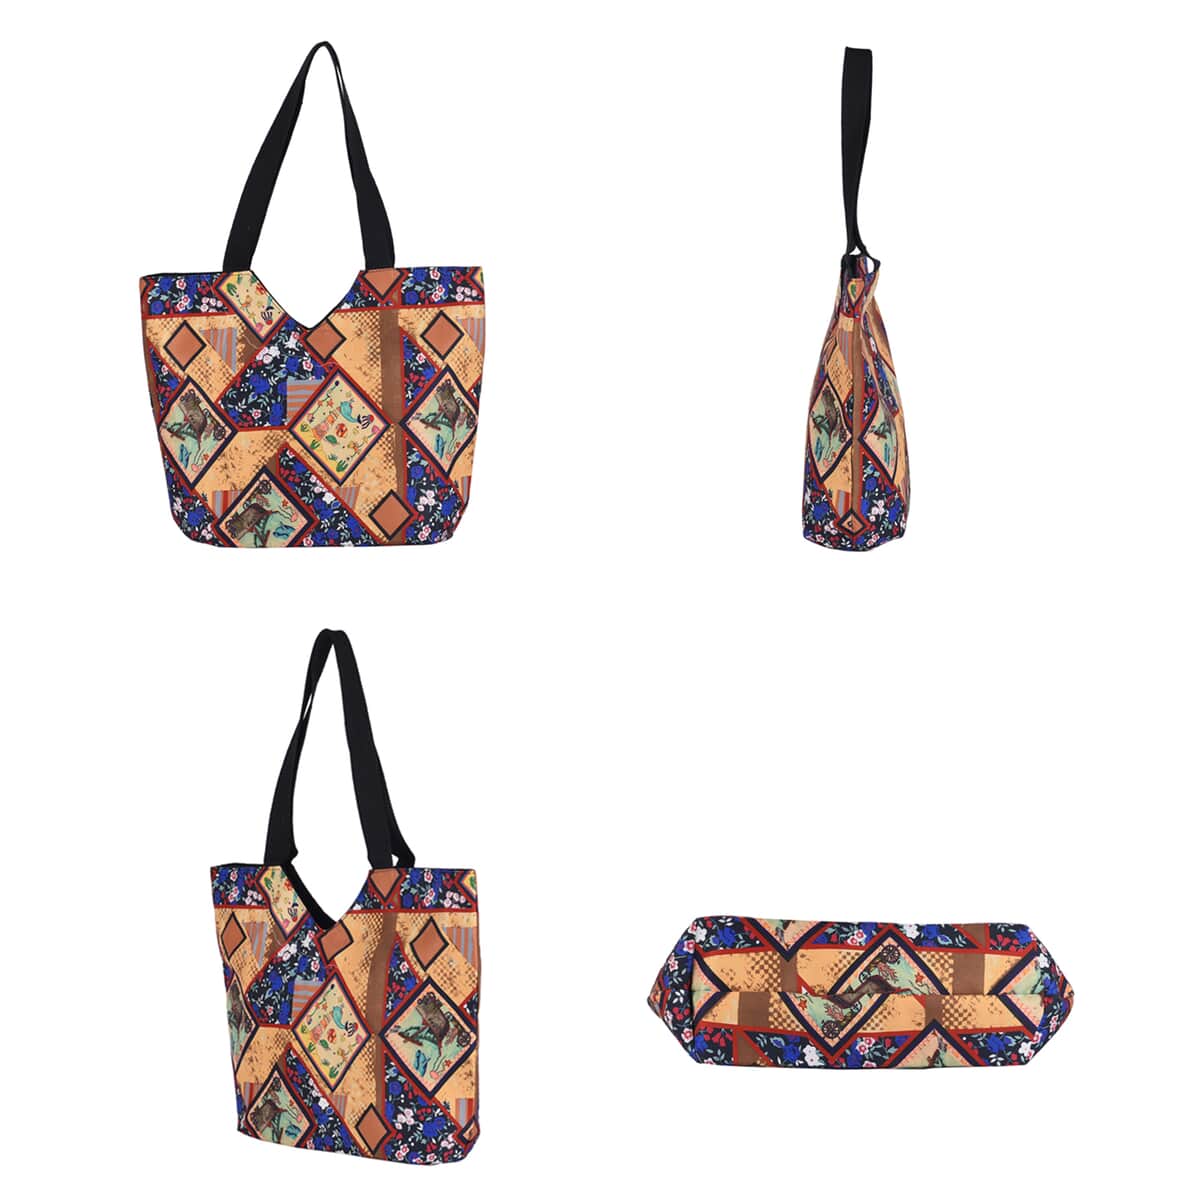 Yellow Patchwork Printed Pattern Tote Bag (17.5"x6"x13.5") with Handle Drop image number 5